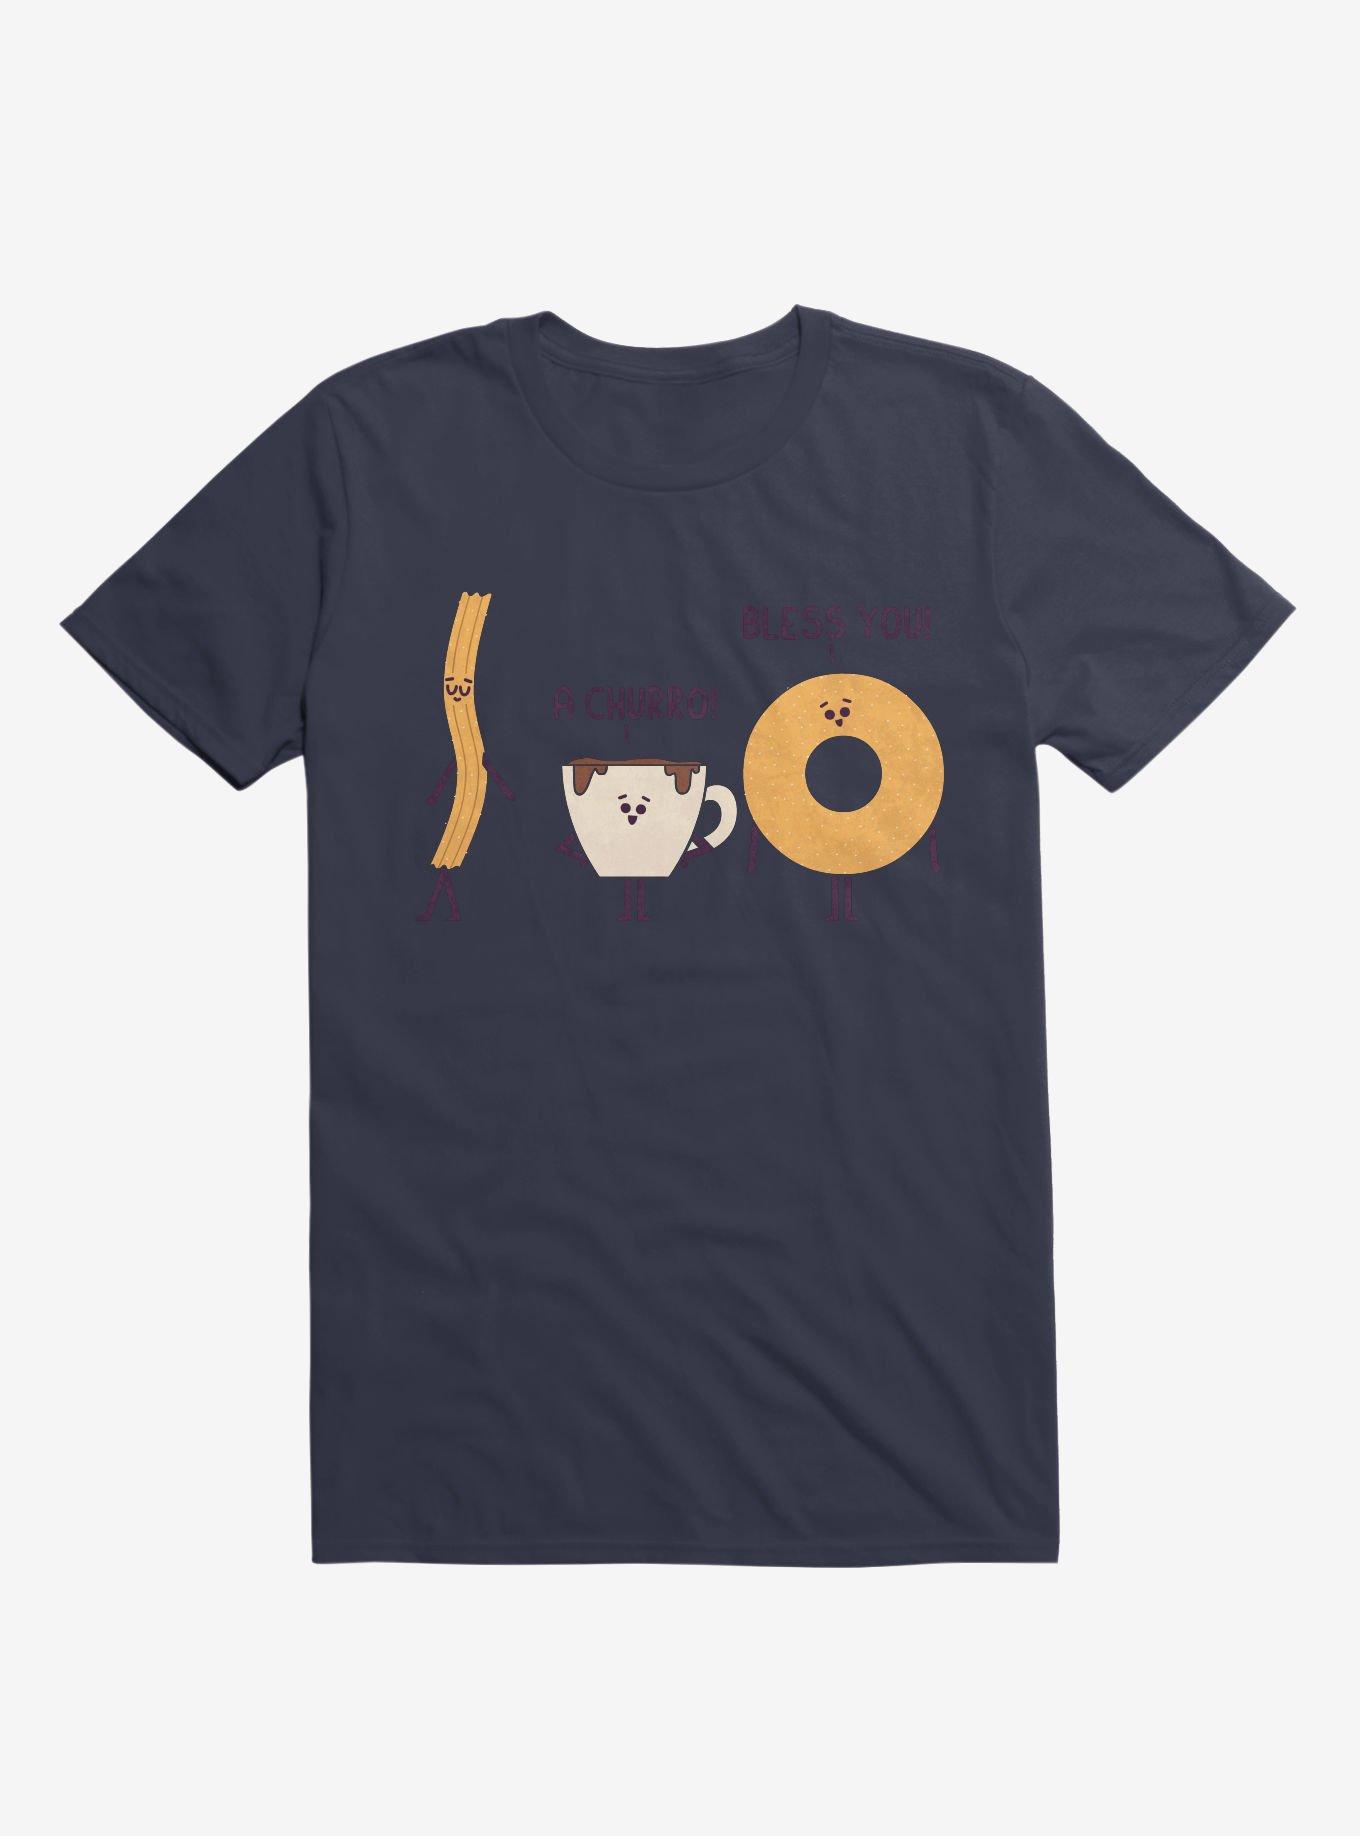 A Churro! Bless You! Coffee And Donut Navy Blue T-Shirt